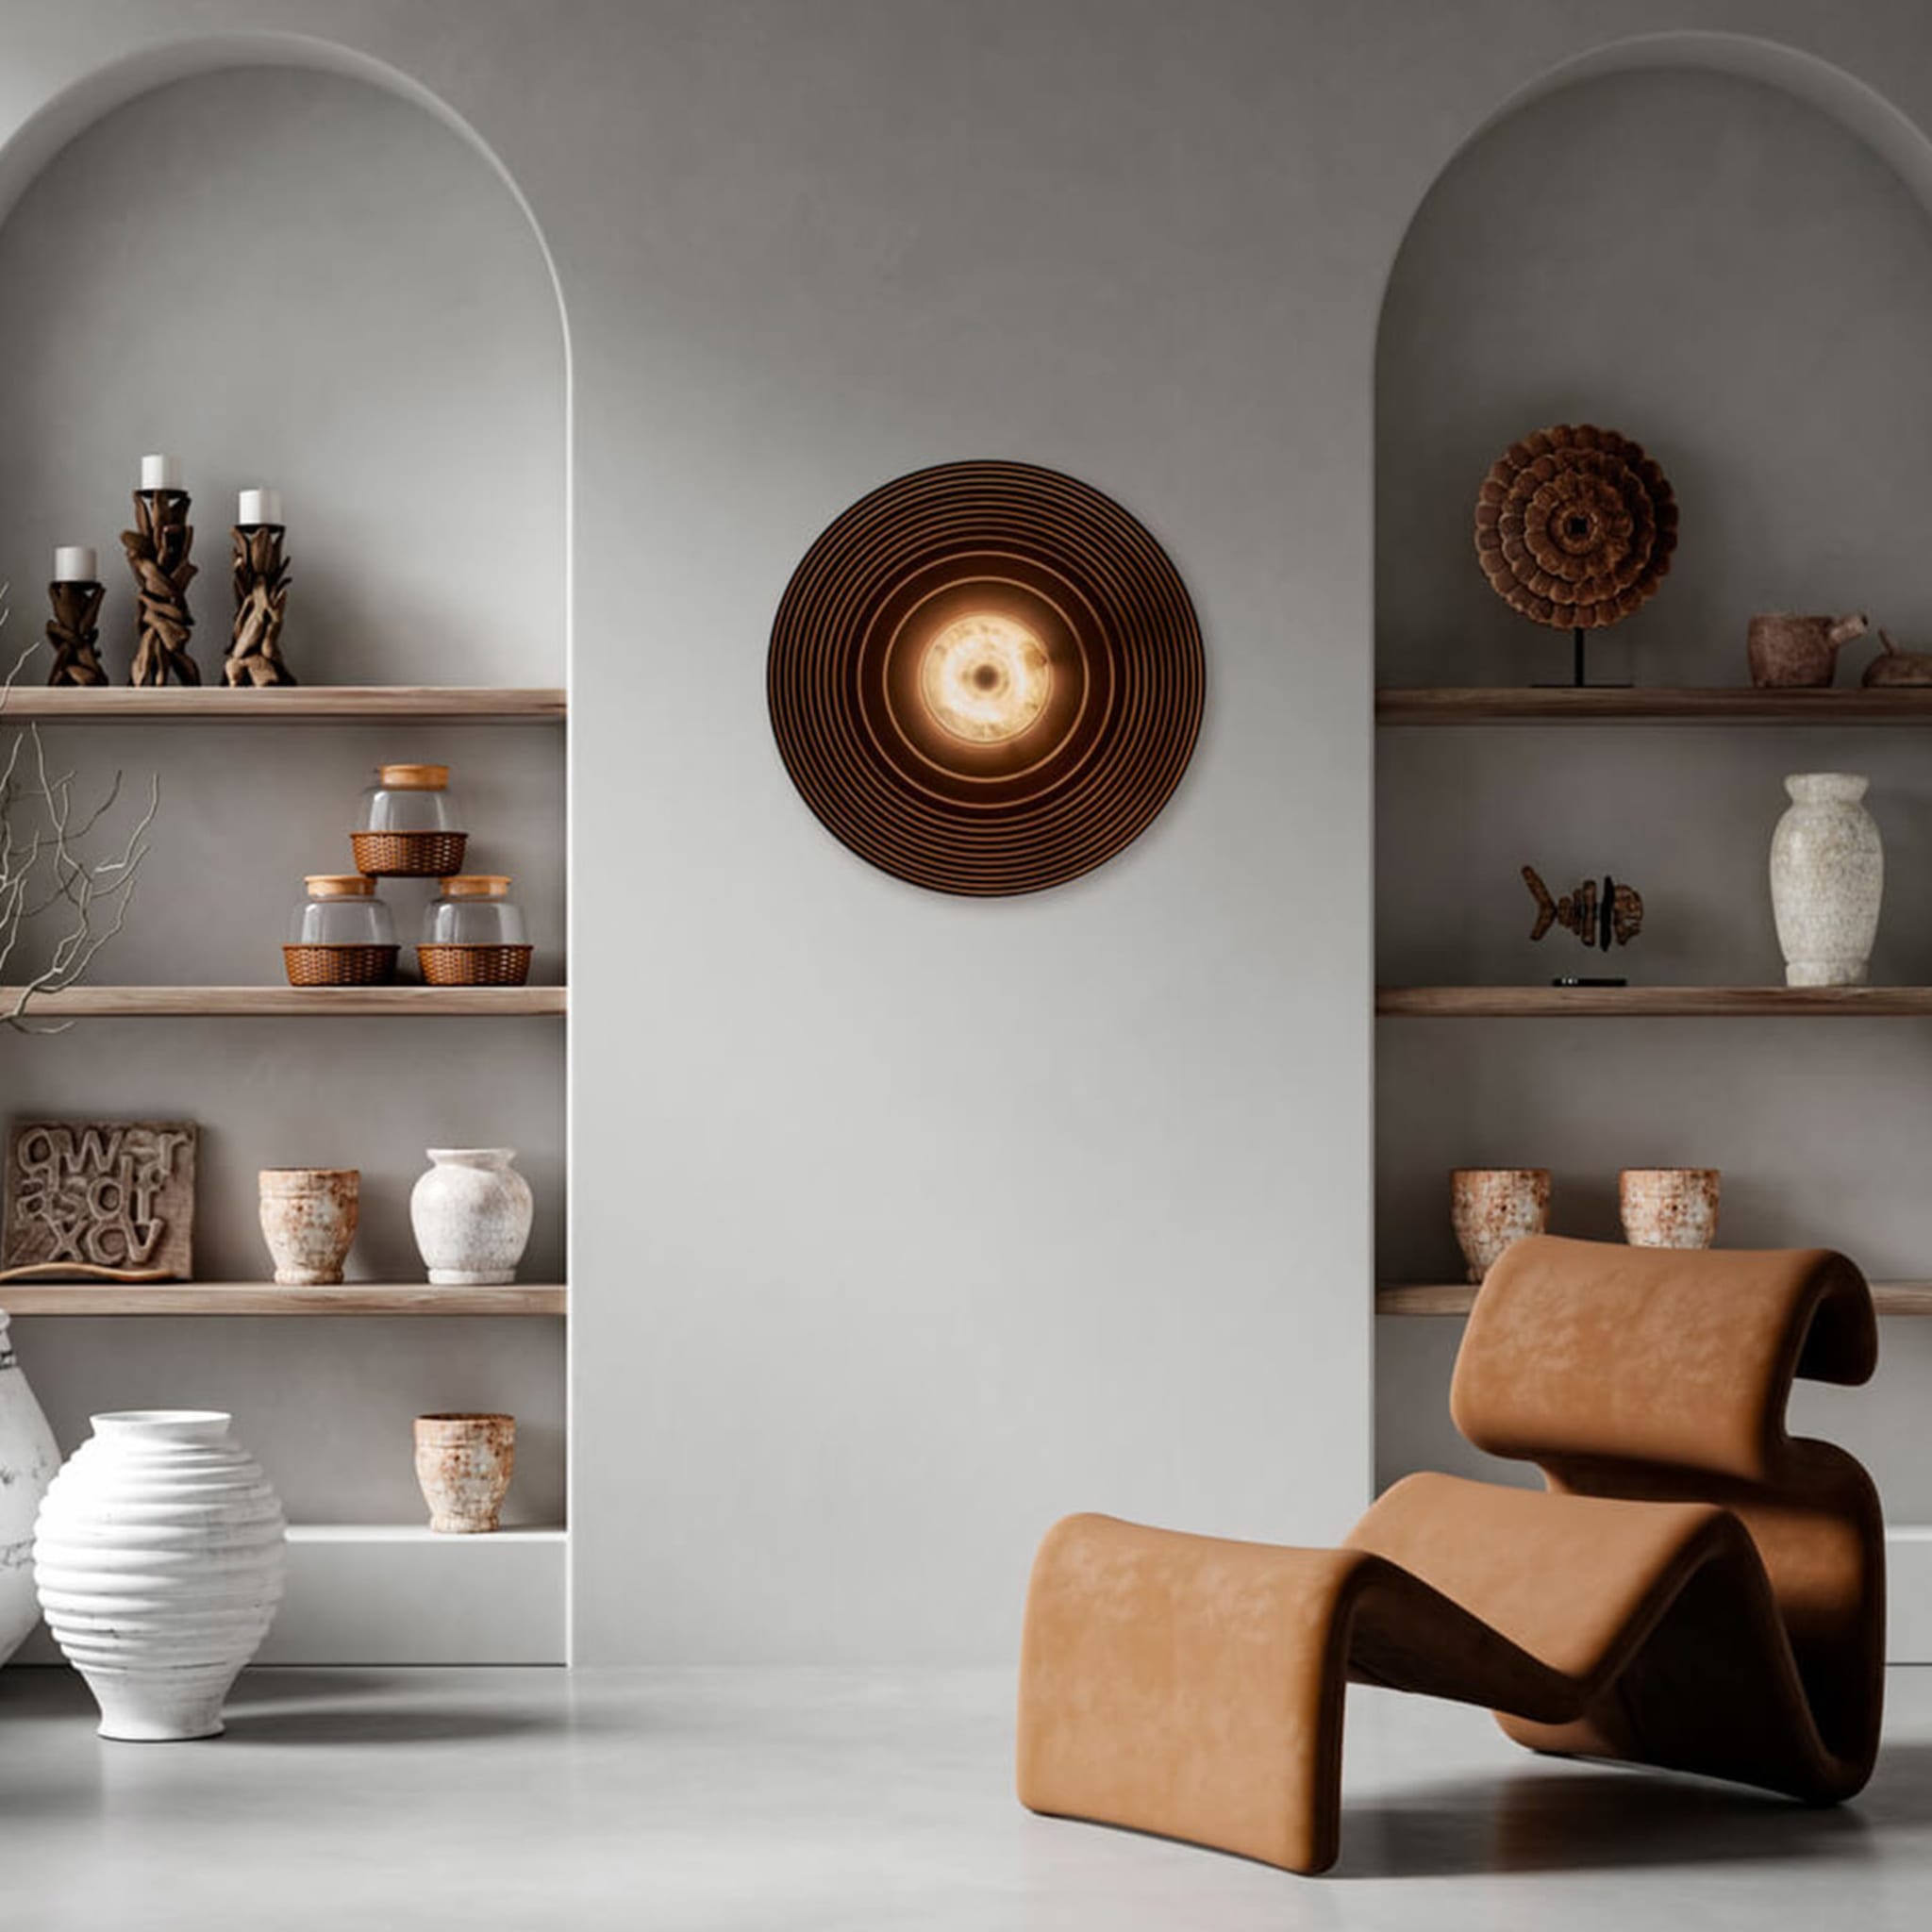 Sculptural Wall Sconce "Gong" By LC Atelier - Alternative view 5